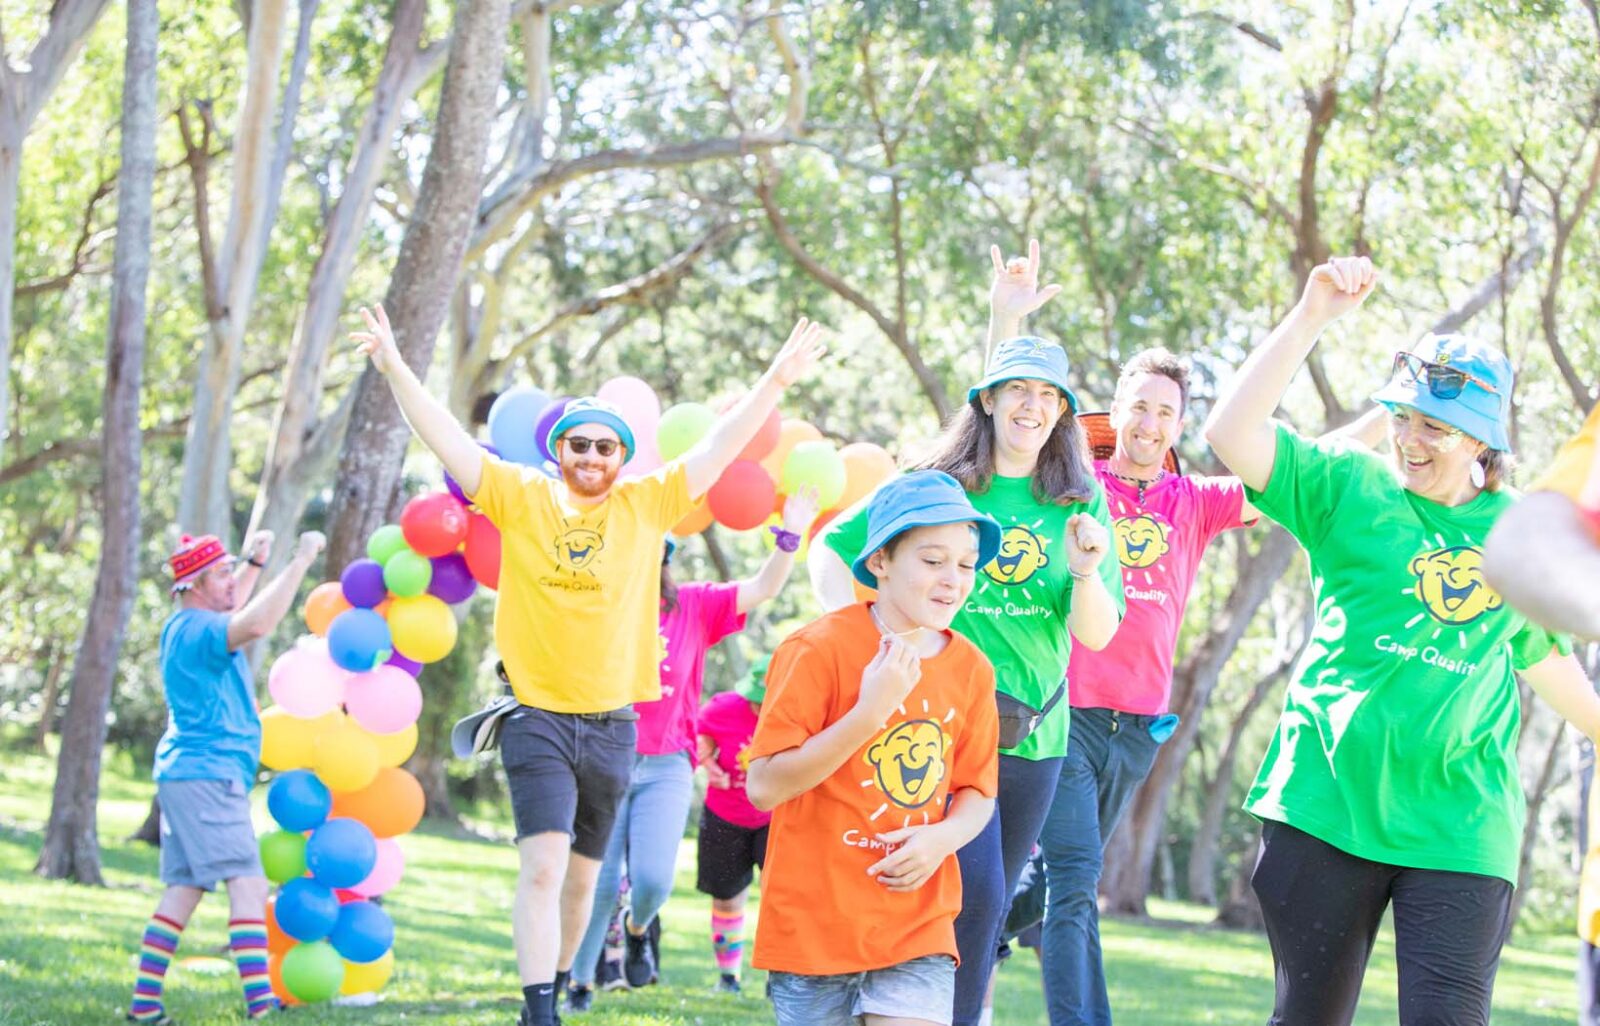 Volunteers and Camp Quality children running together